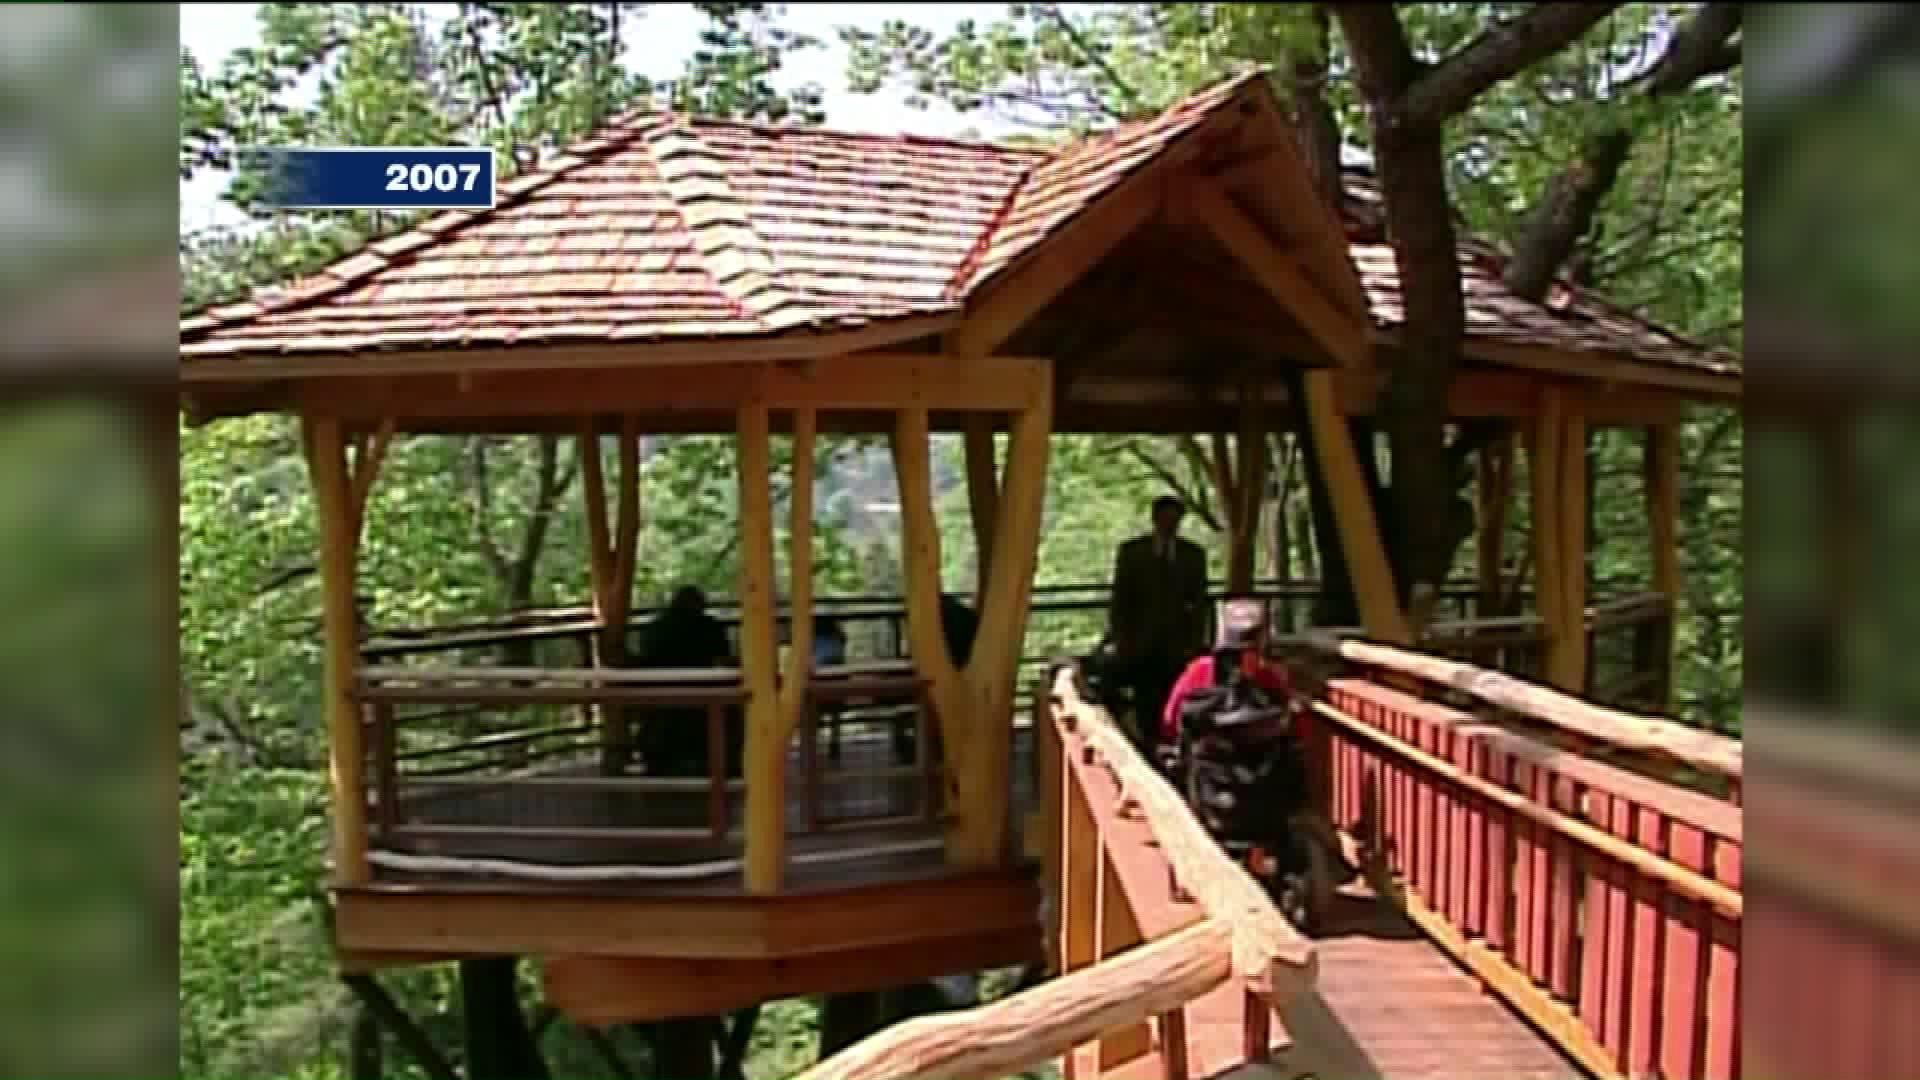 Video Vault: Treehouse Opens at Nay Aug Park in 2007